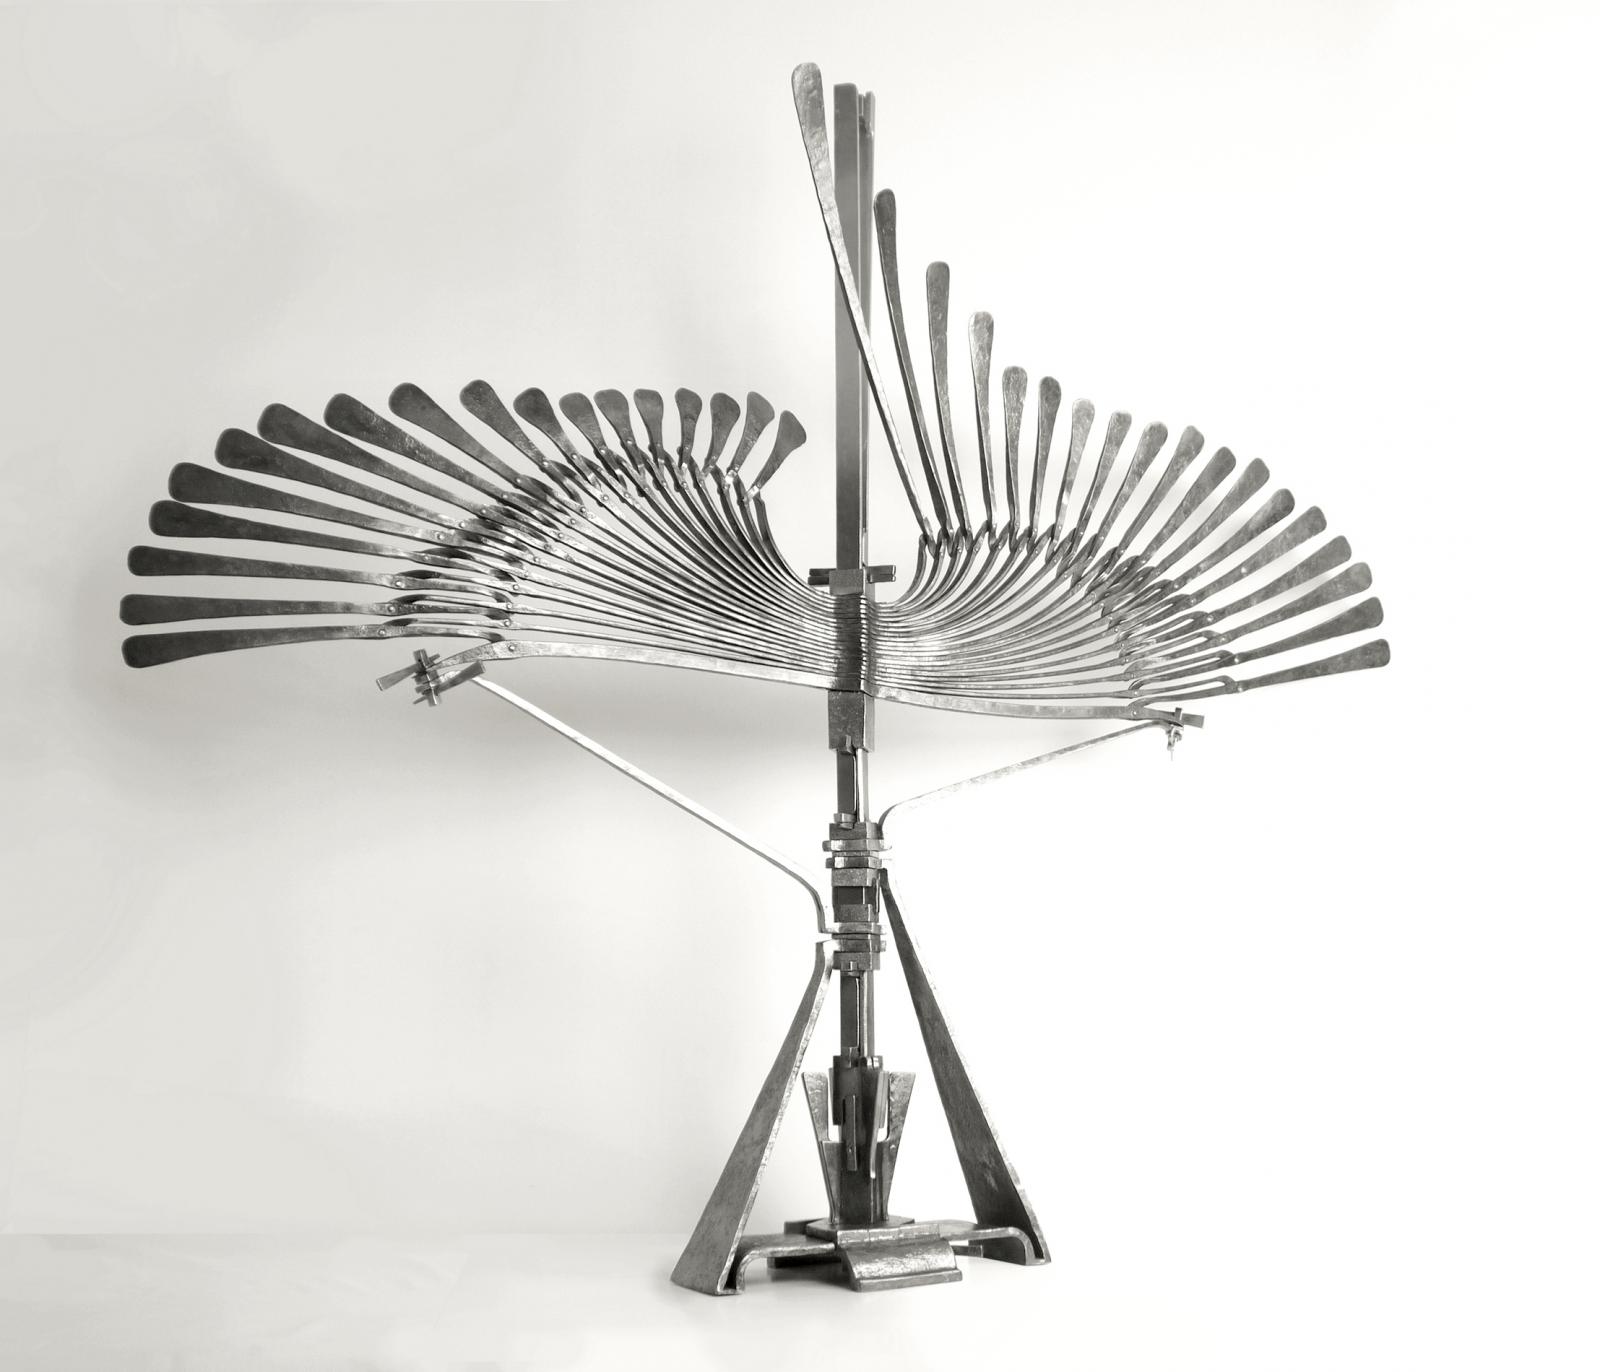 “Arrow” is second piece finished in 2022 in series “Treatise on Siege Machines”.  “Treatise” originated as representing the power of wings – and thus the power of nature – but it evolved into a broader statement of humans’ ability to harness power, using weaponry known as “siege machines” as a metaphor.